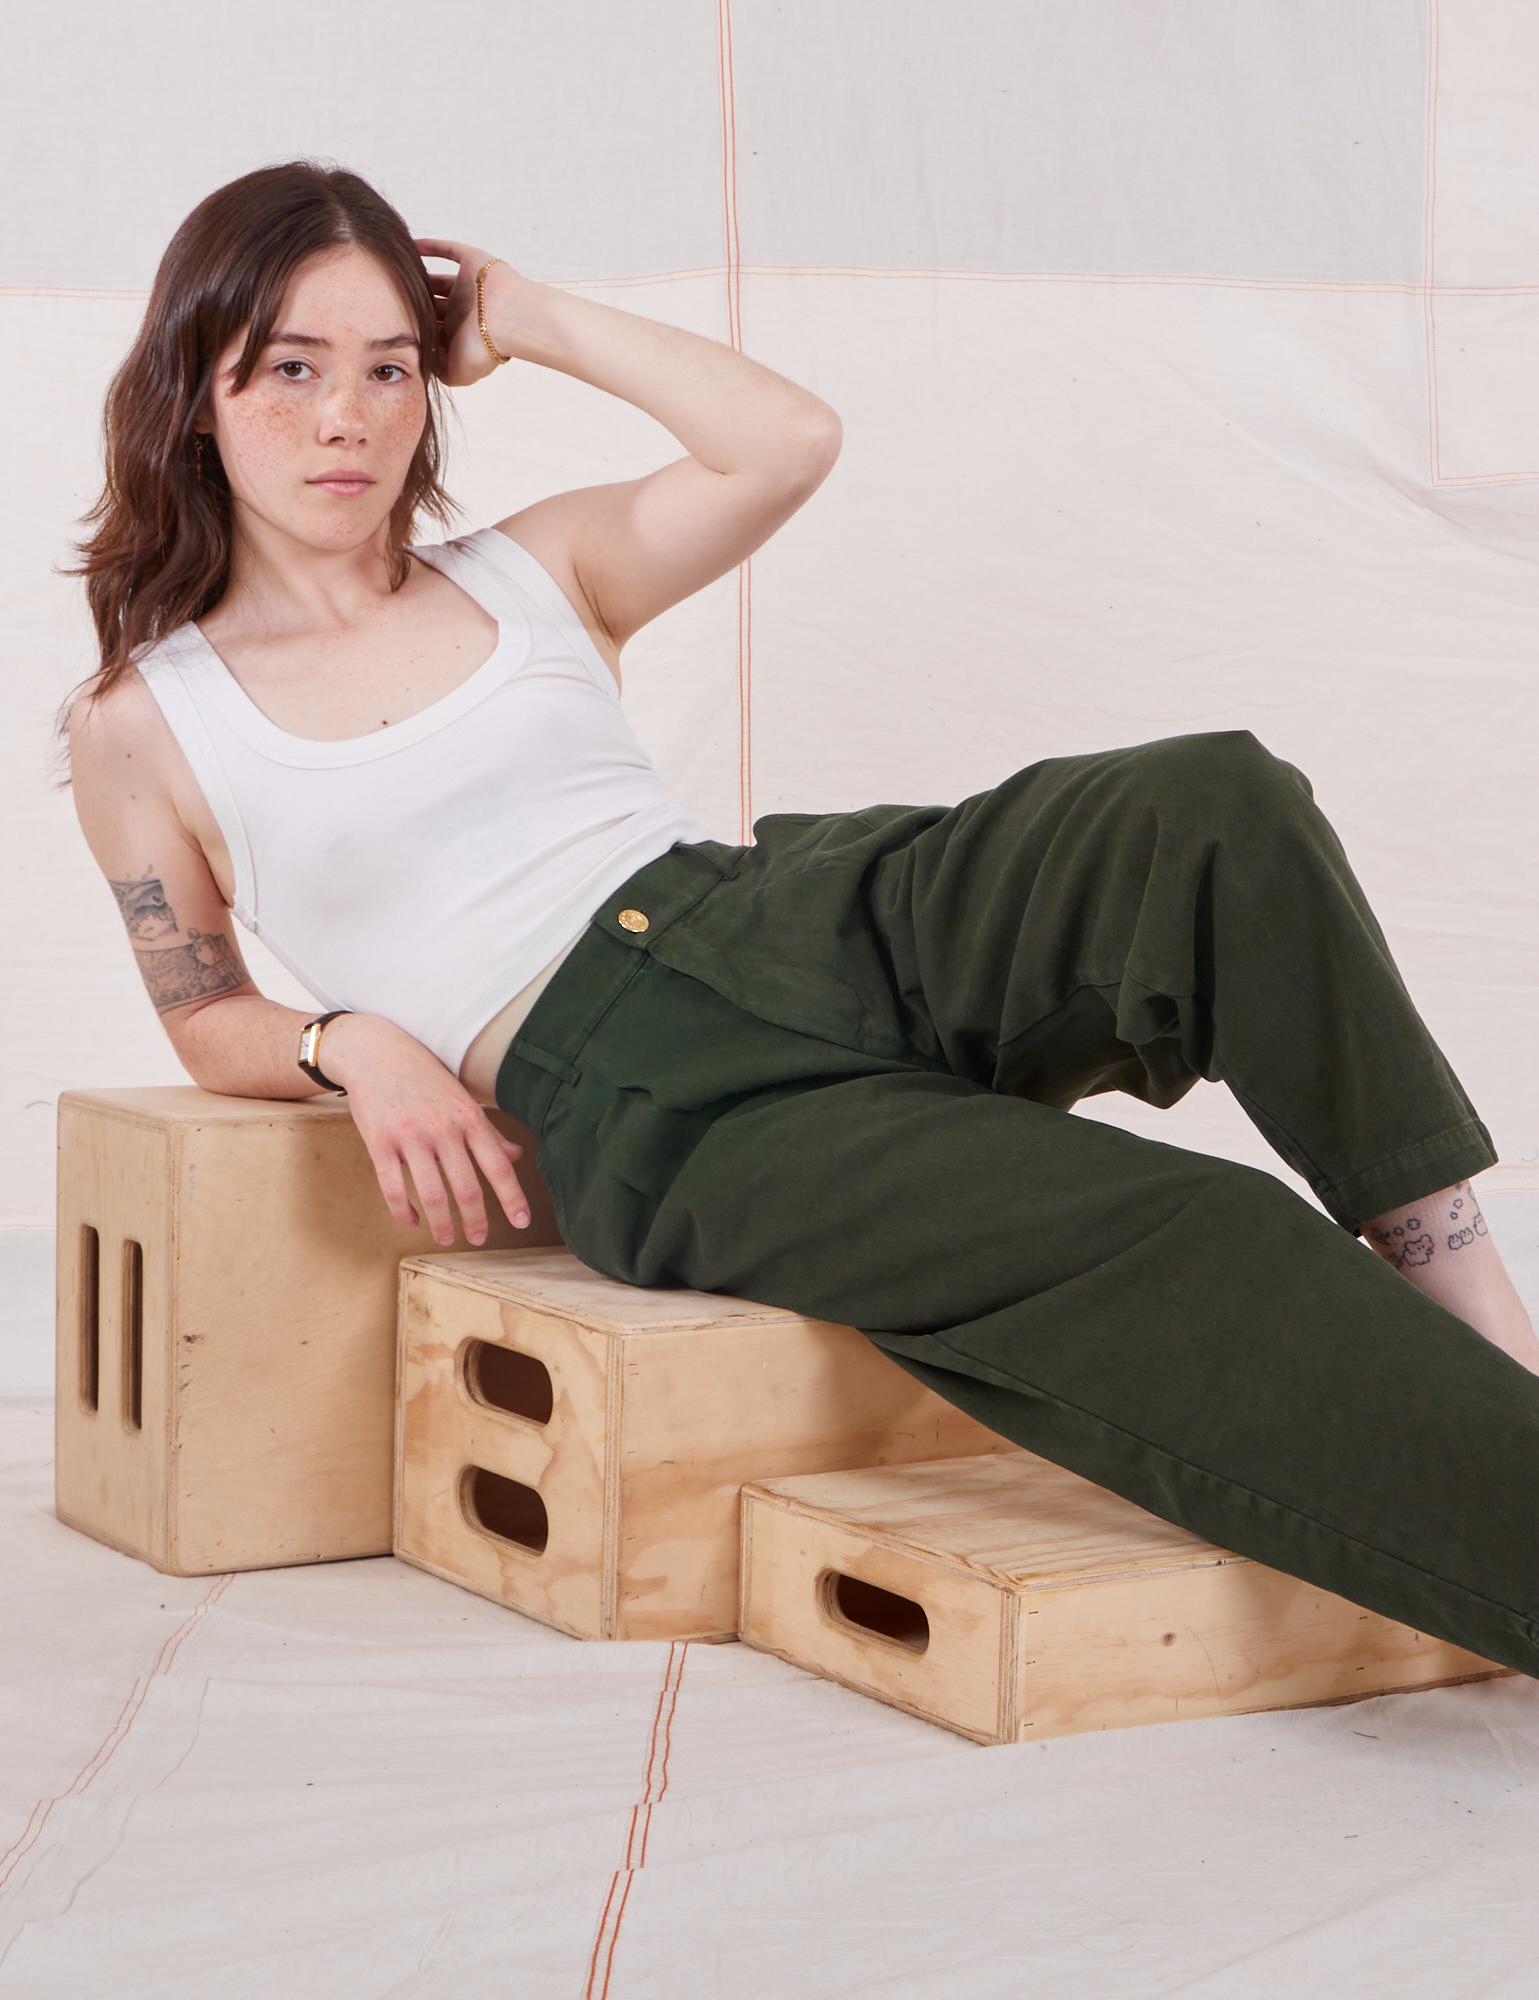 Hana is wearing Heavyweight Trousers in Swamp Green and Cropped Tank Top in vintage tee off-white